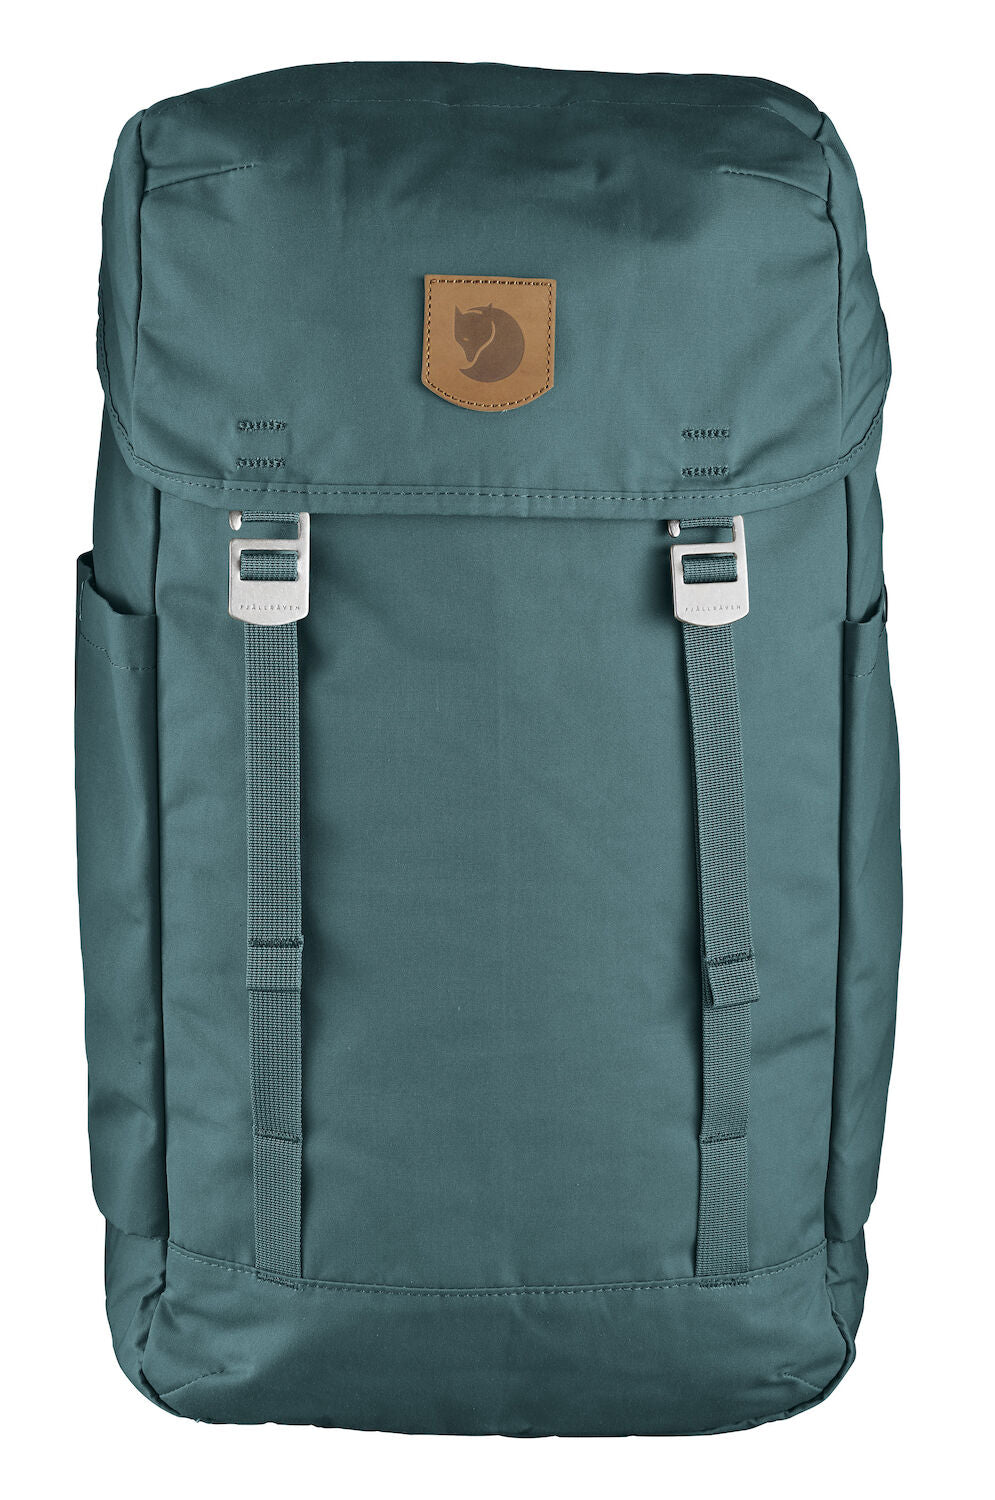 Fjallraven Greenland Wax Travel Pack,  price tracker / tracking,   price history charts,  price watches,  price drop alerts